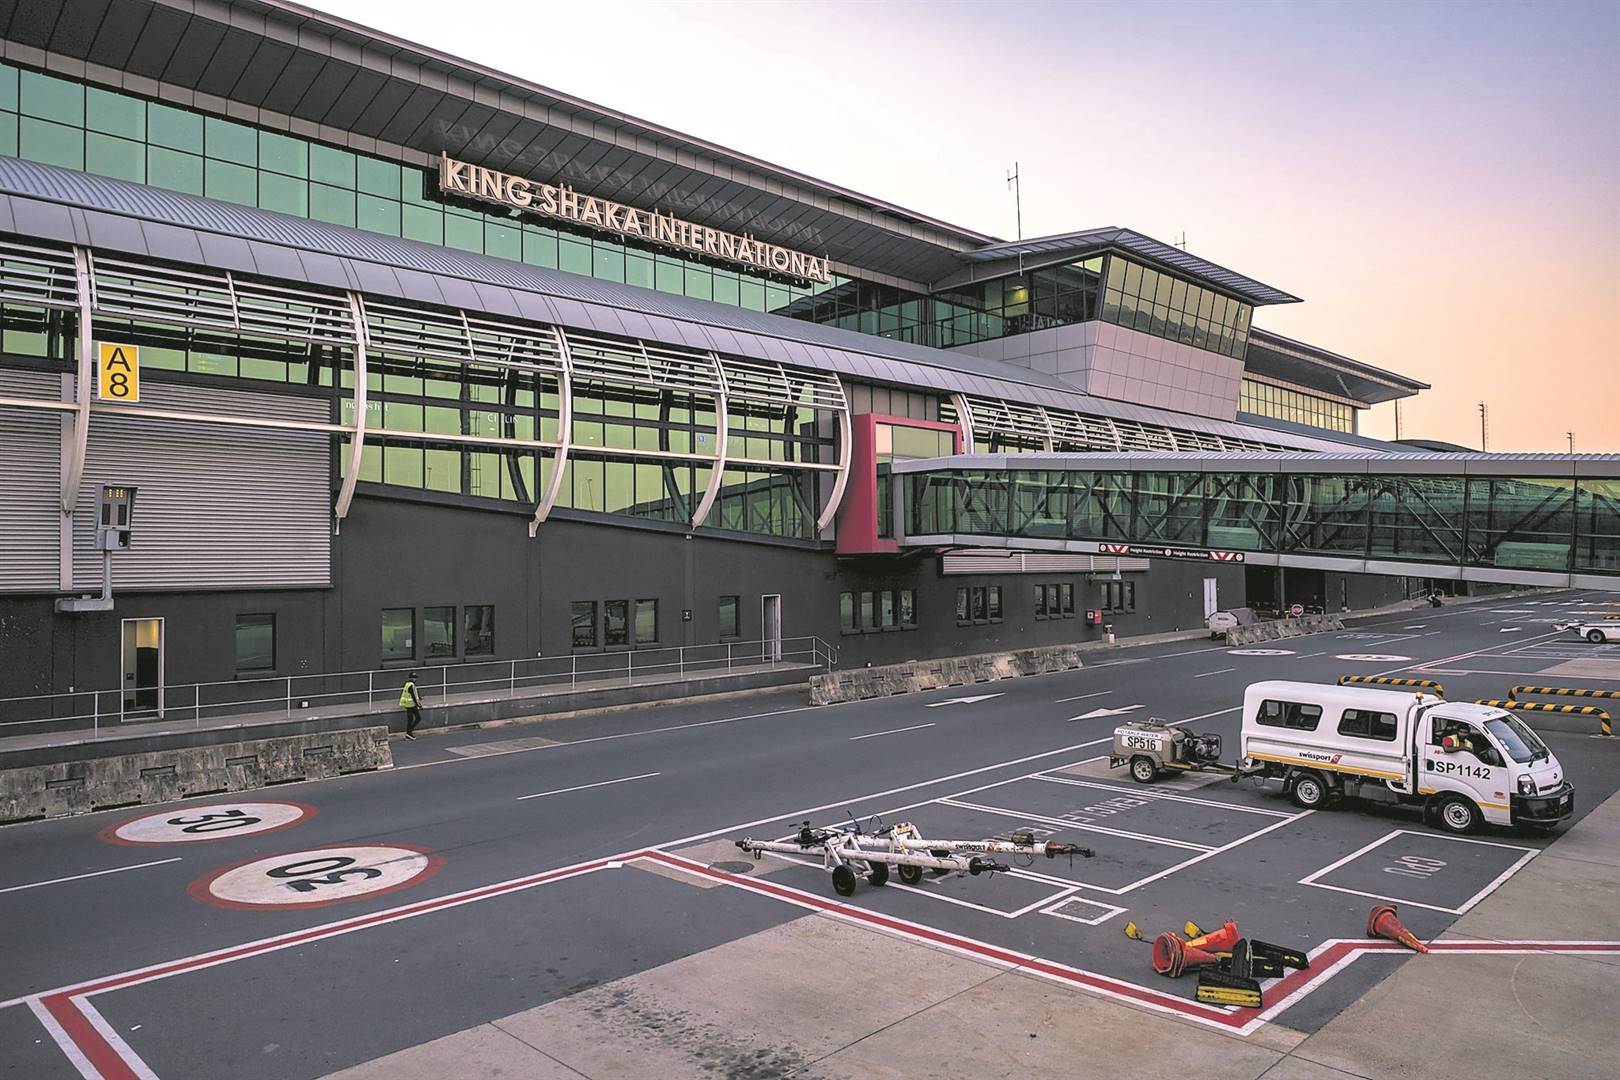 After the devastating floods in April, King Shaka airport has had to flush toilets with buckets while water pipelines are being repaired.